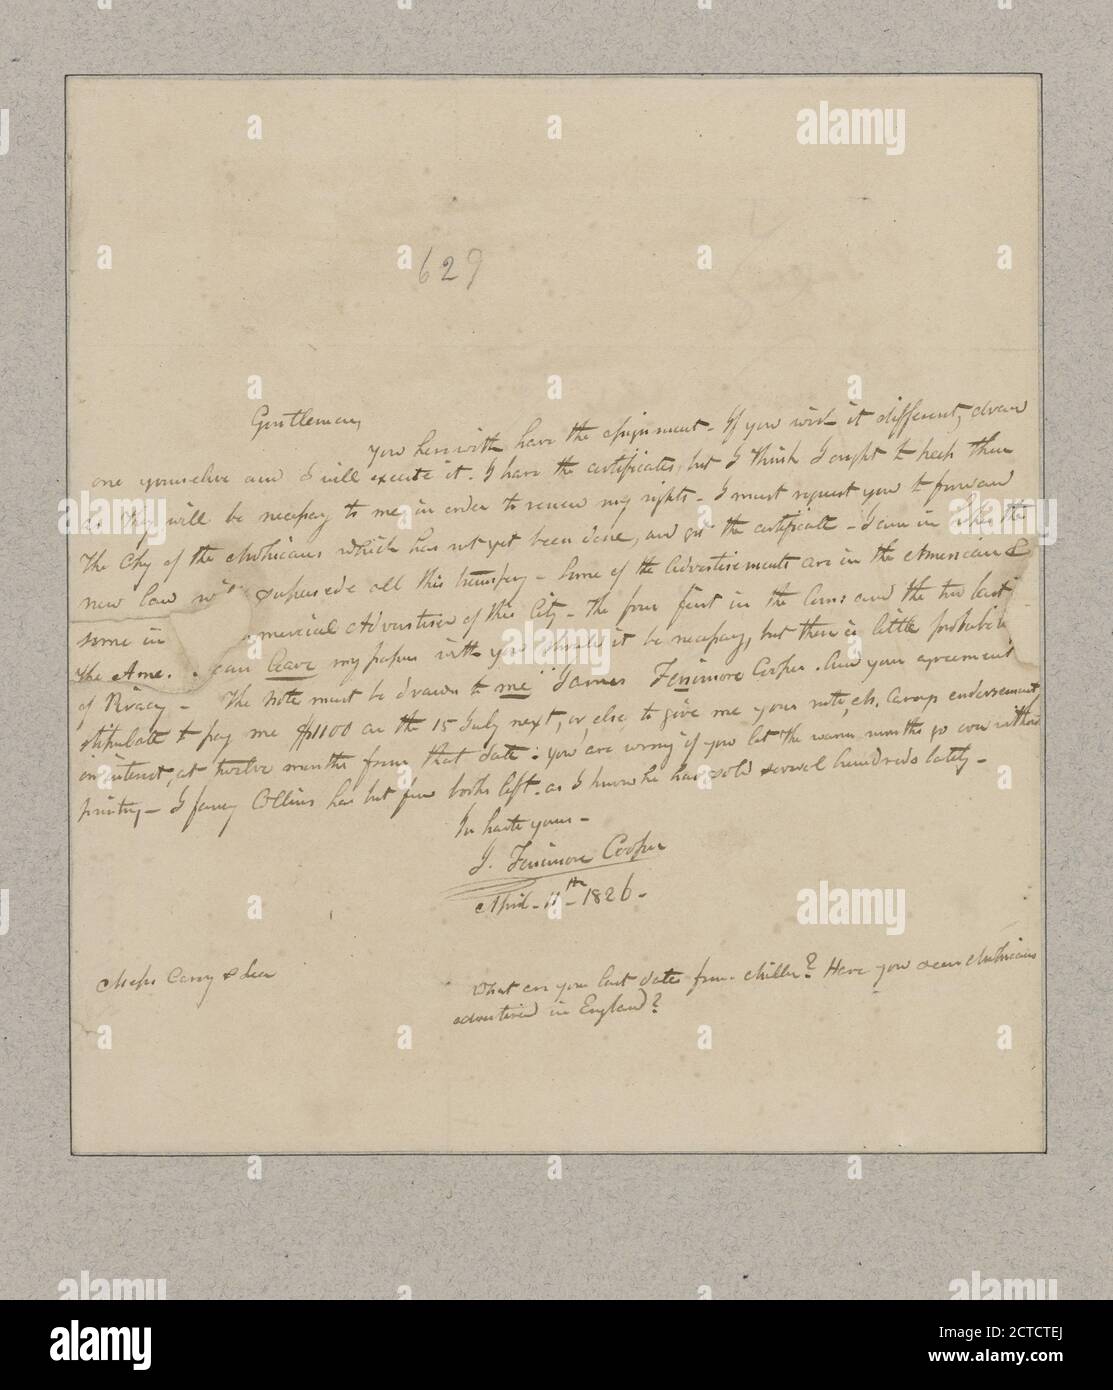 Cooper, James Fenimore. To Messrs. Carey and Lea, text, Documents, 1826 Stock Photo